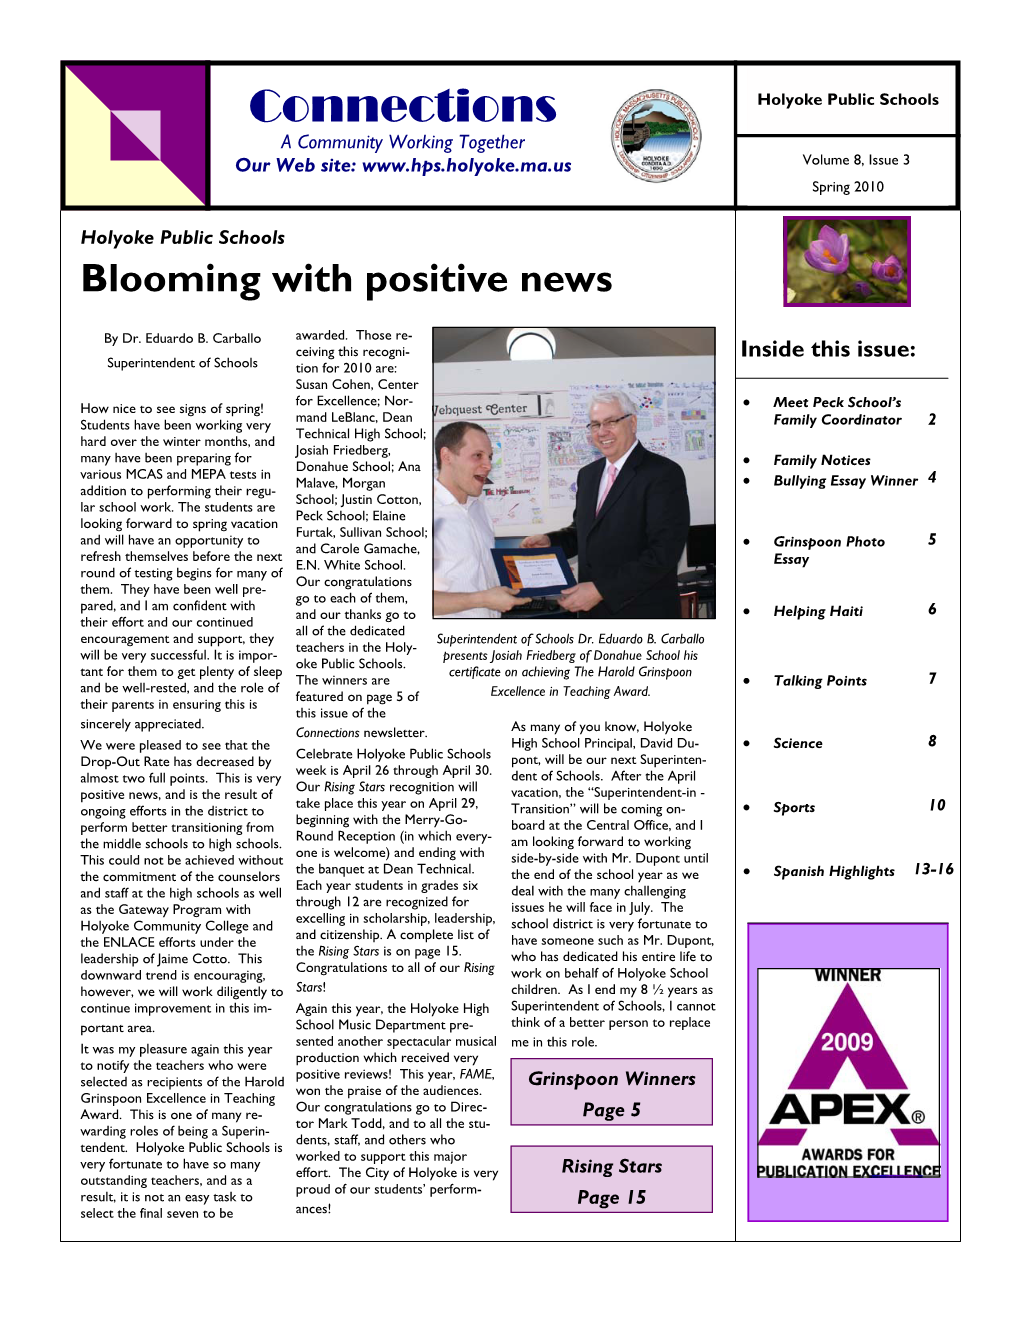 Connections Holyoke Public Schools a Community Working Together Our Web Site: Volume 8, Issue 3 Spring 2010